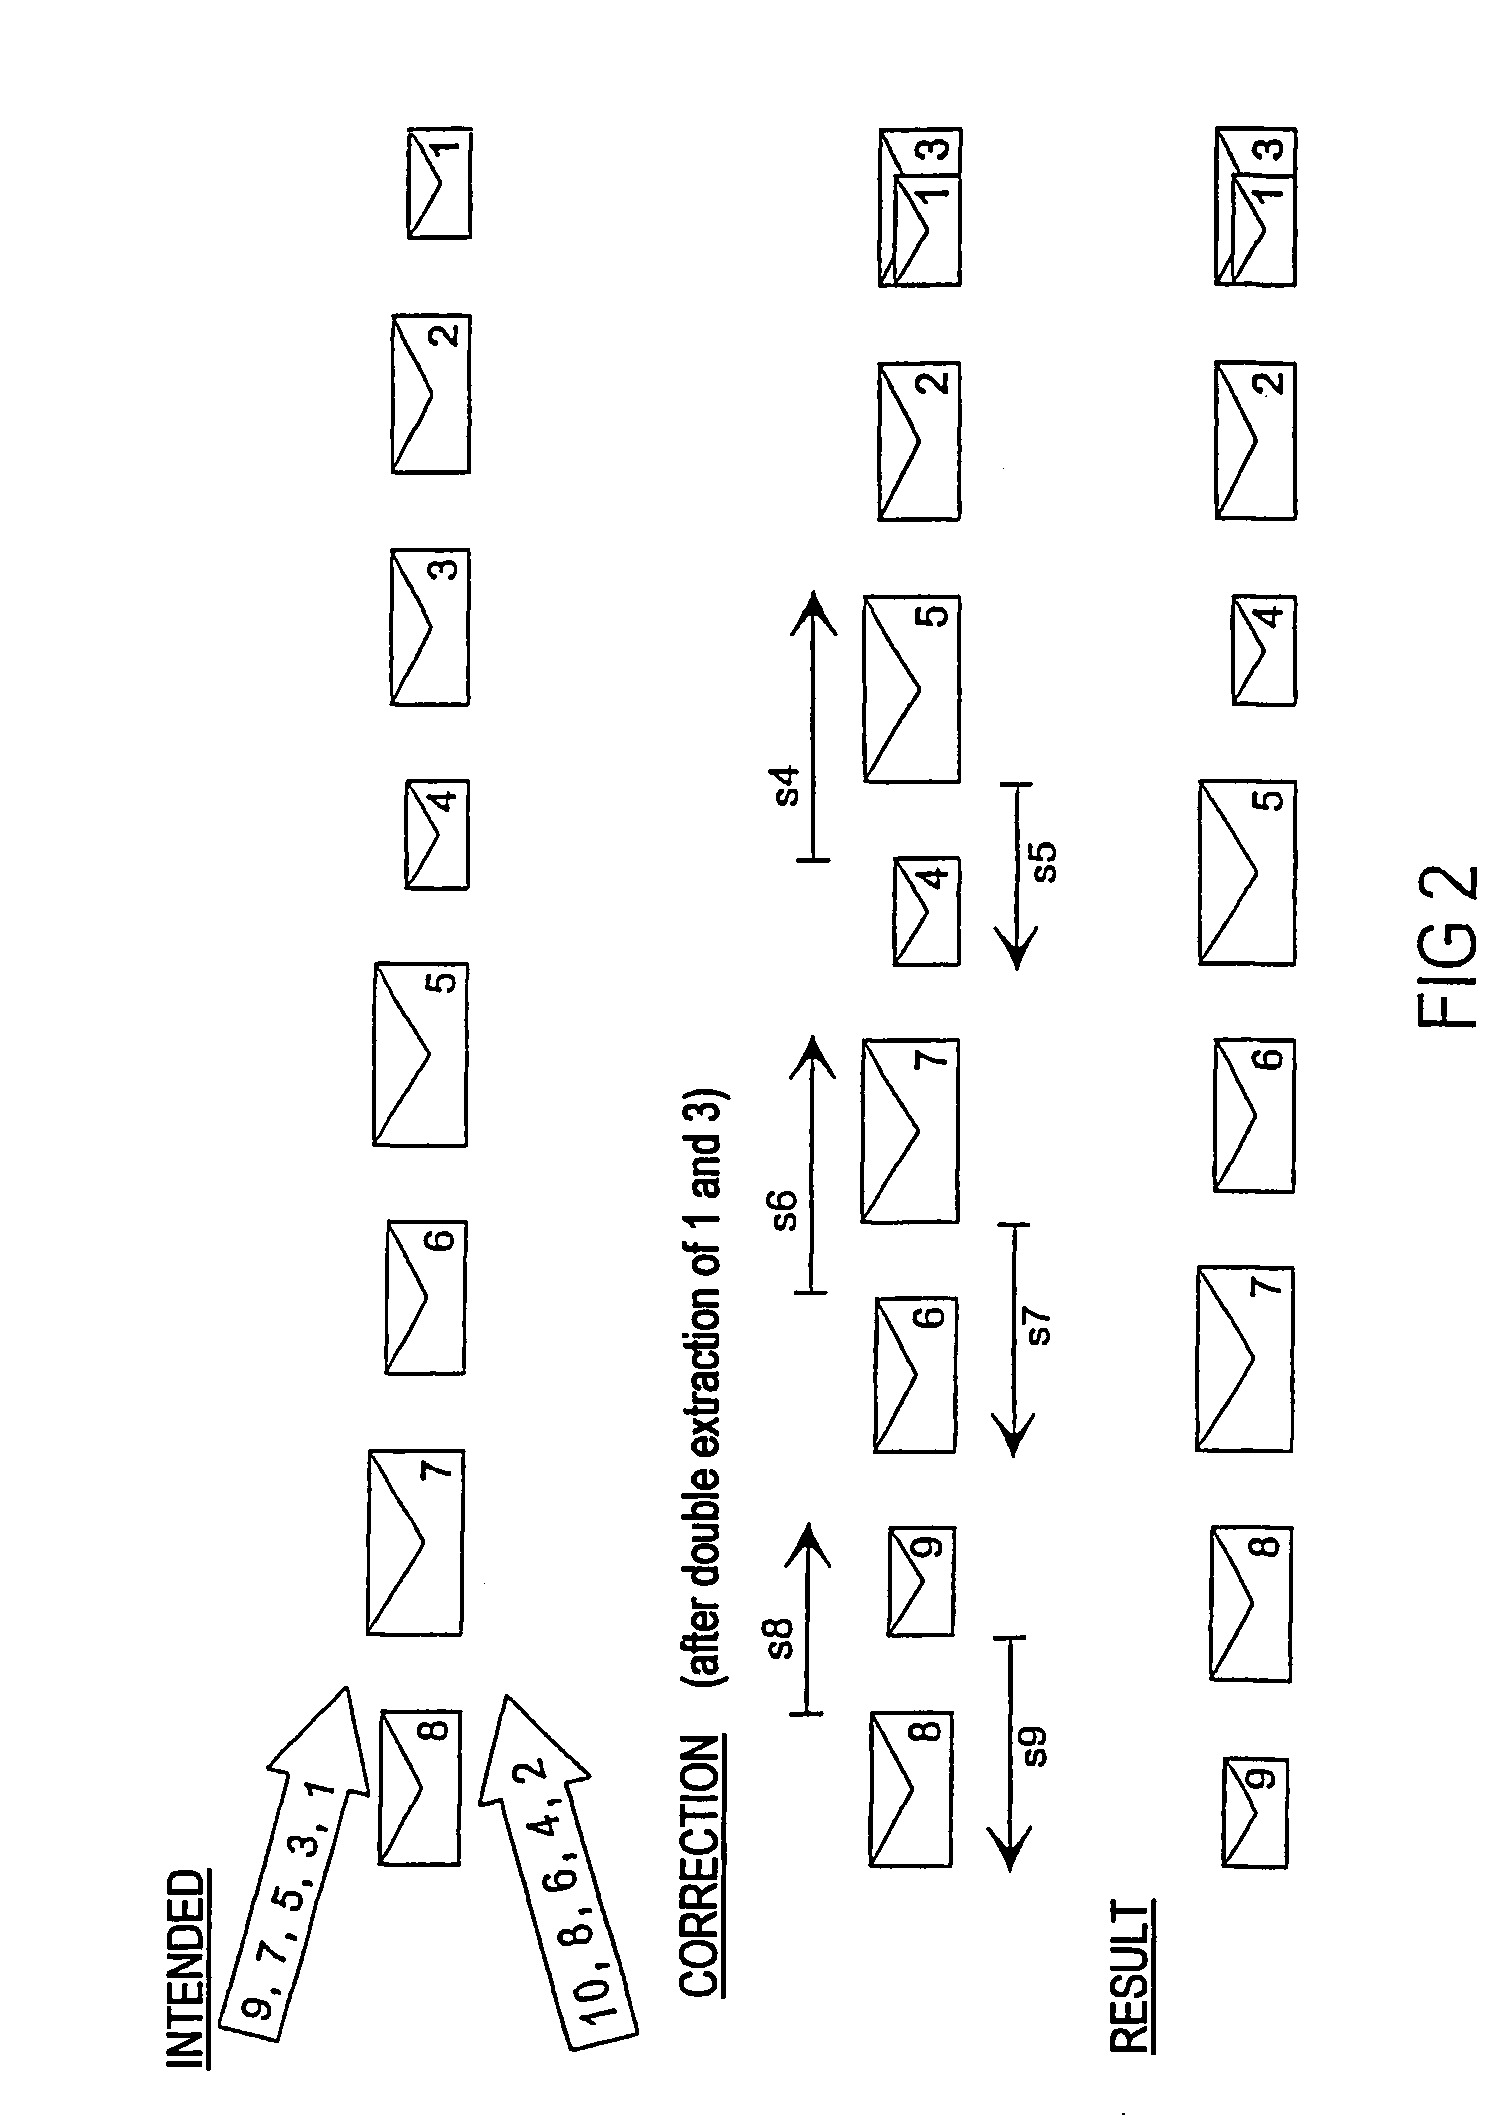 System and method for processing flat mailings